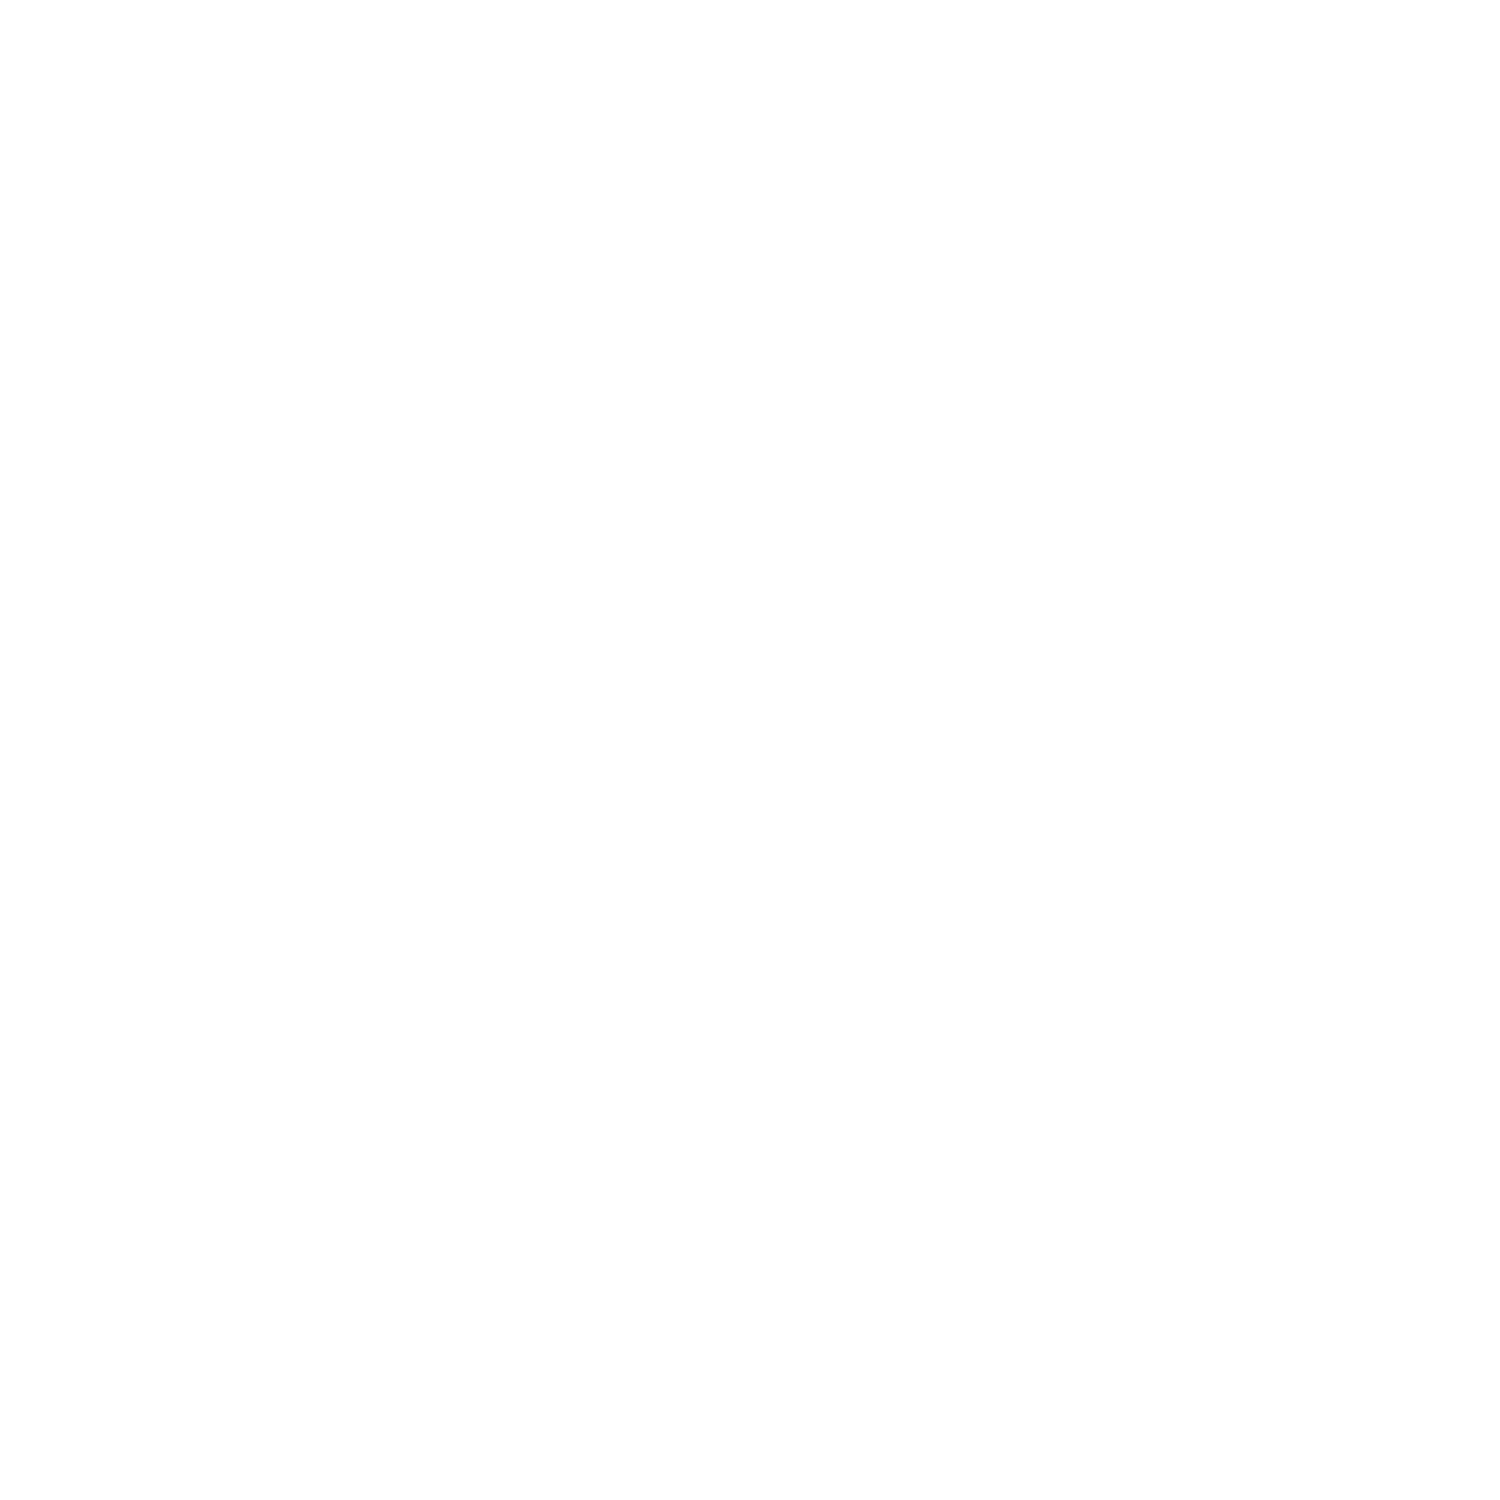 VISION LOGIX WOODWORKING